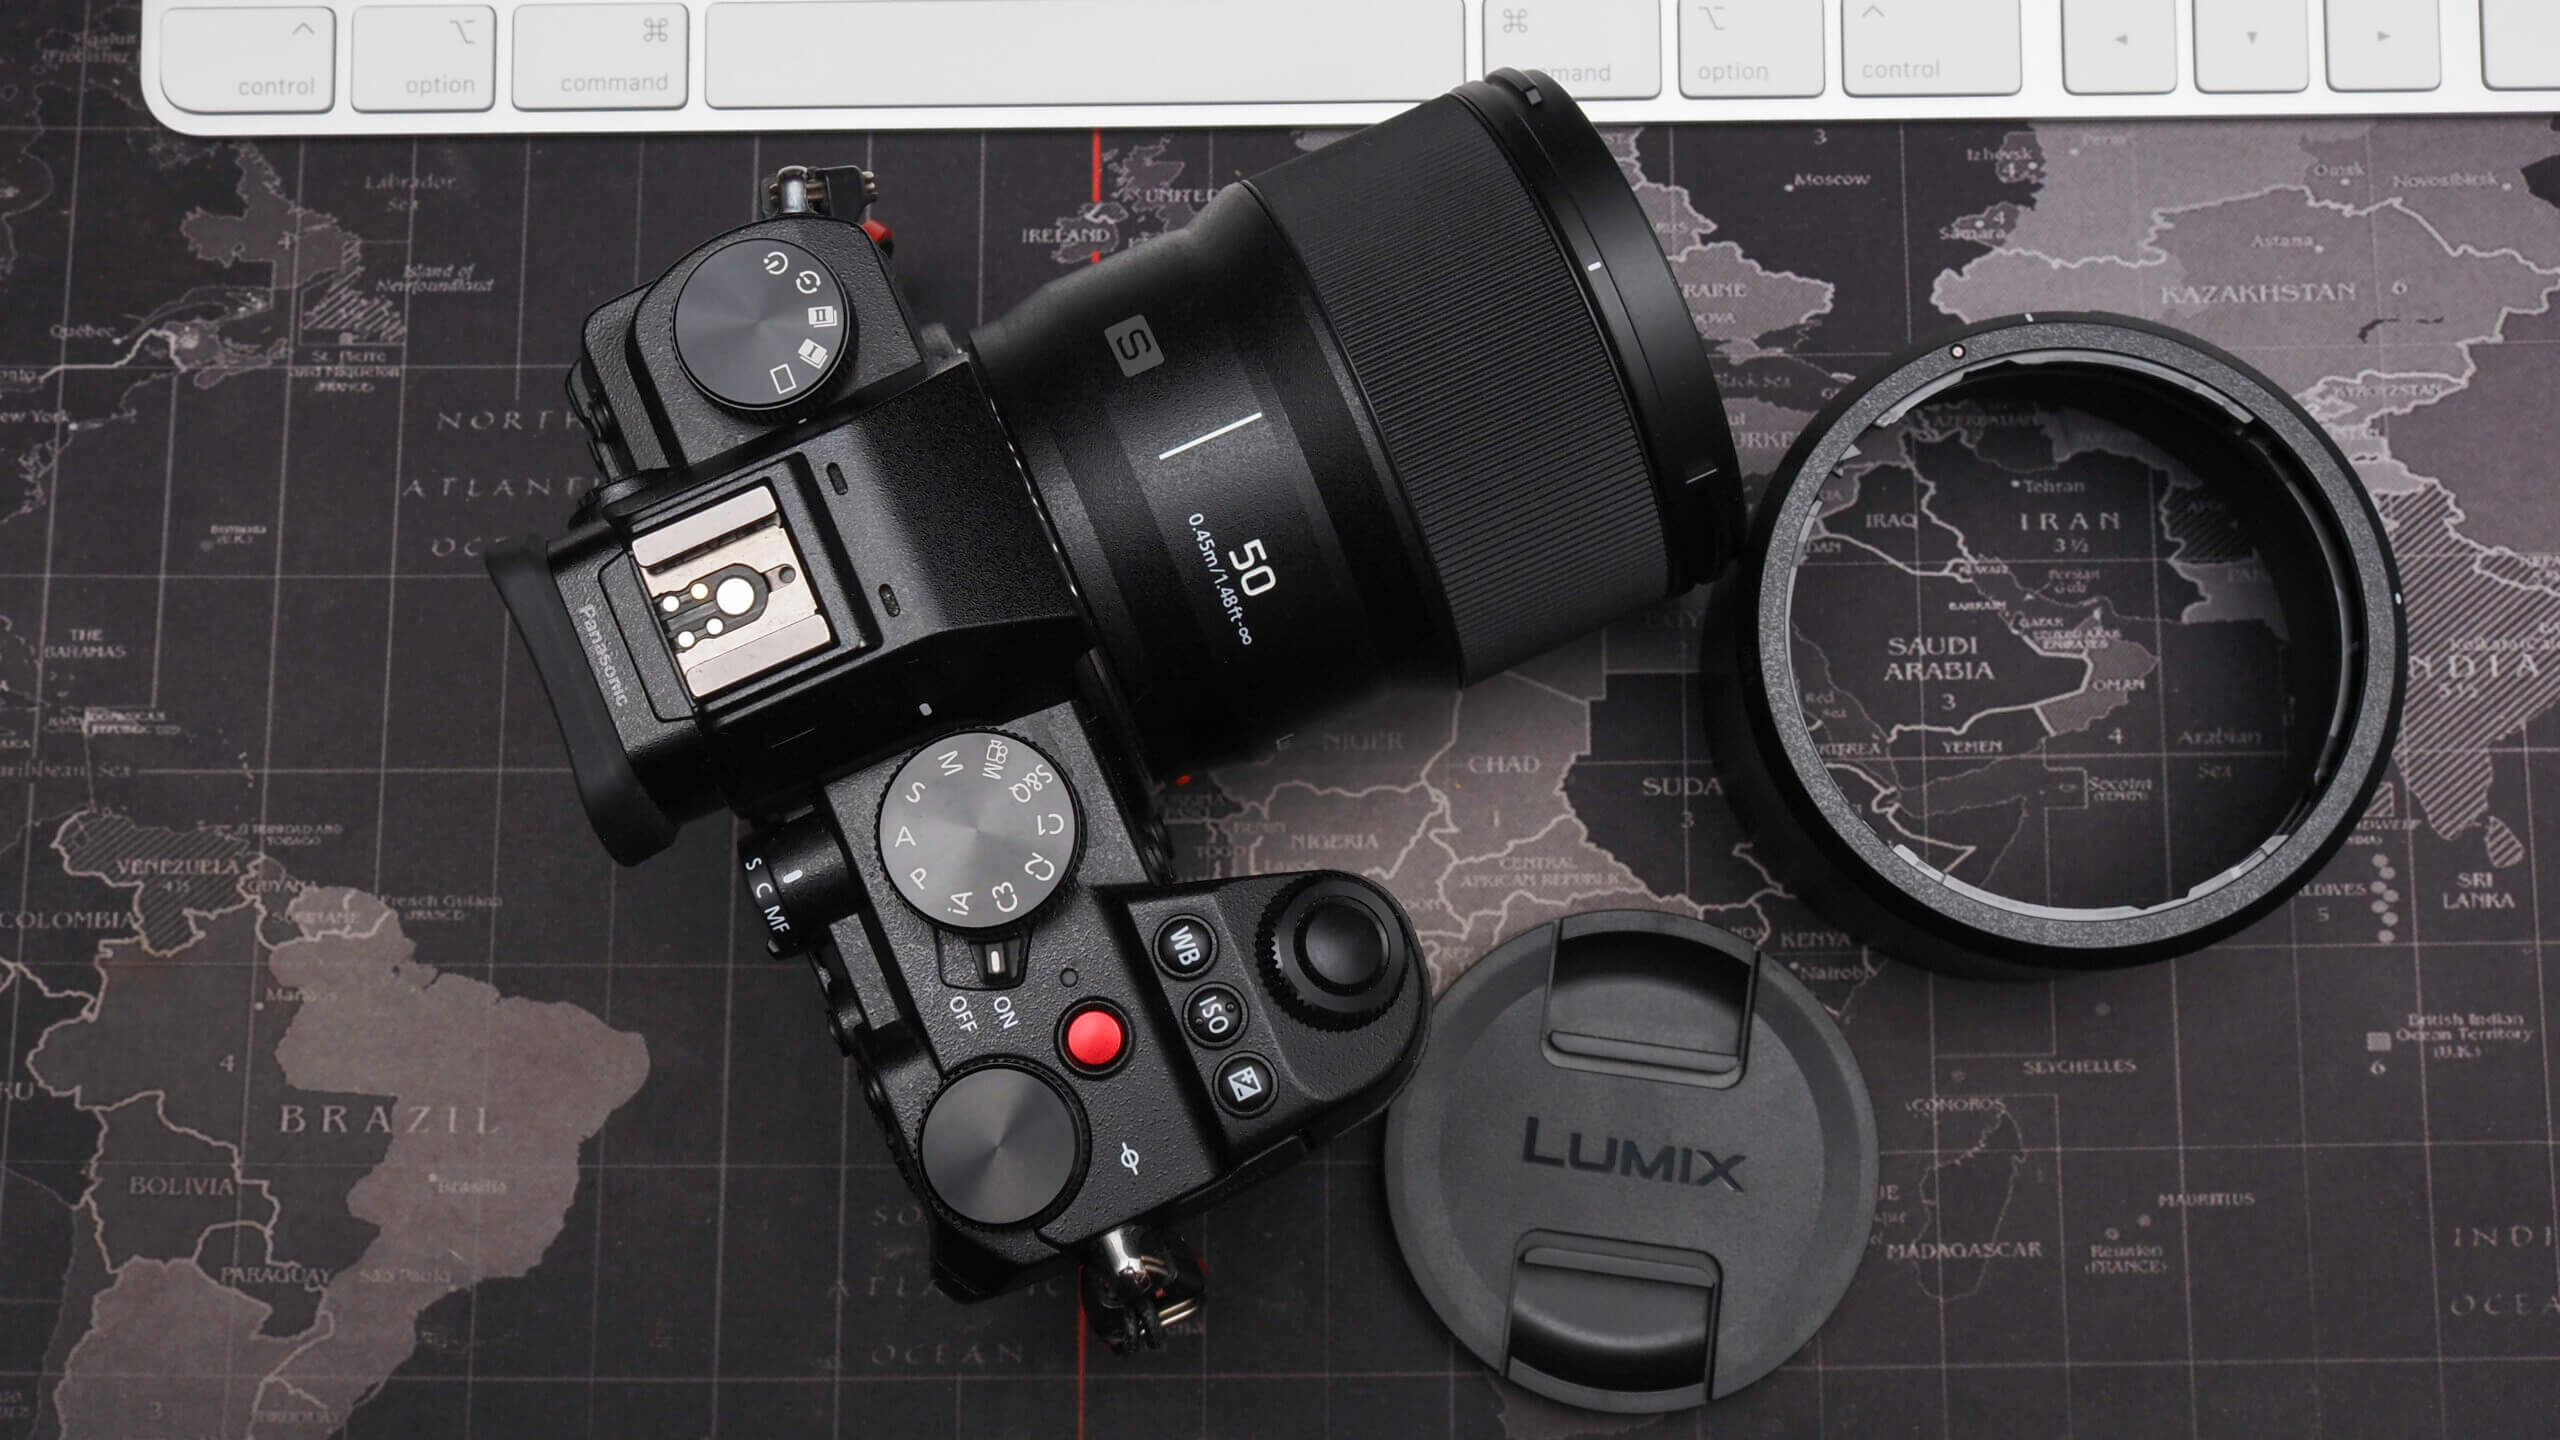 sympathie Bedreven pen Panasonic Lumix 50mm f/1.8 S review: It's nifty, fifty, and oh so fine